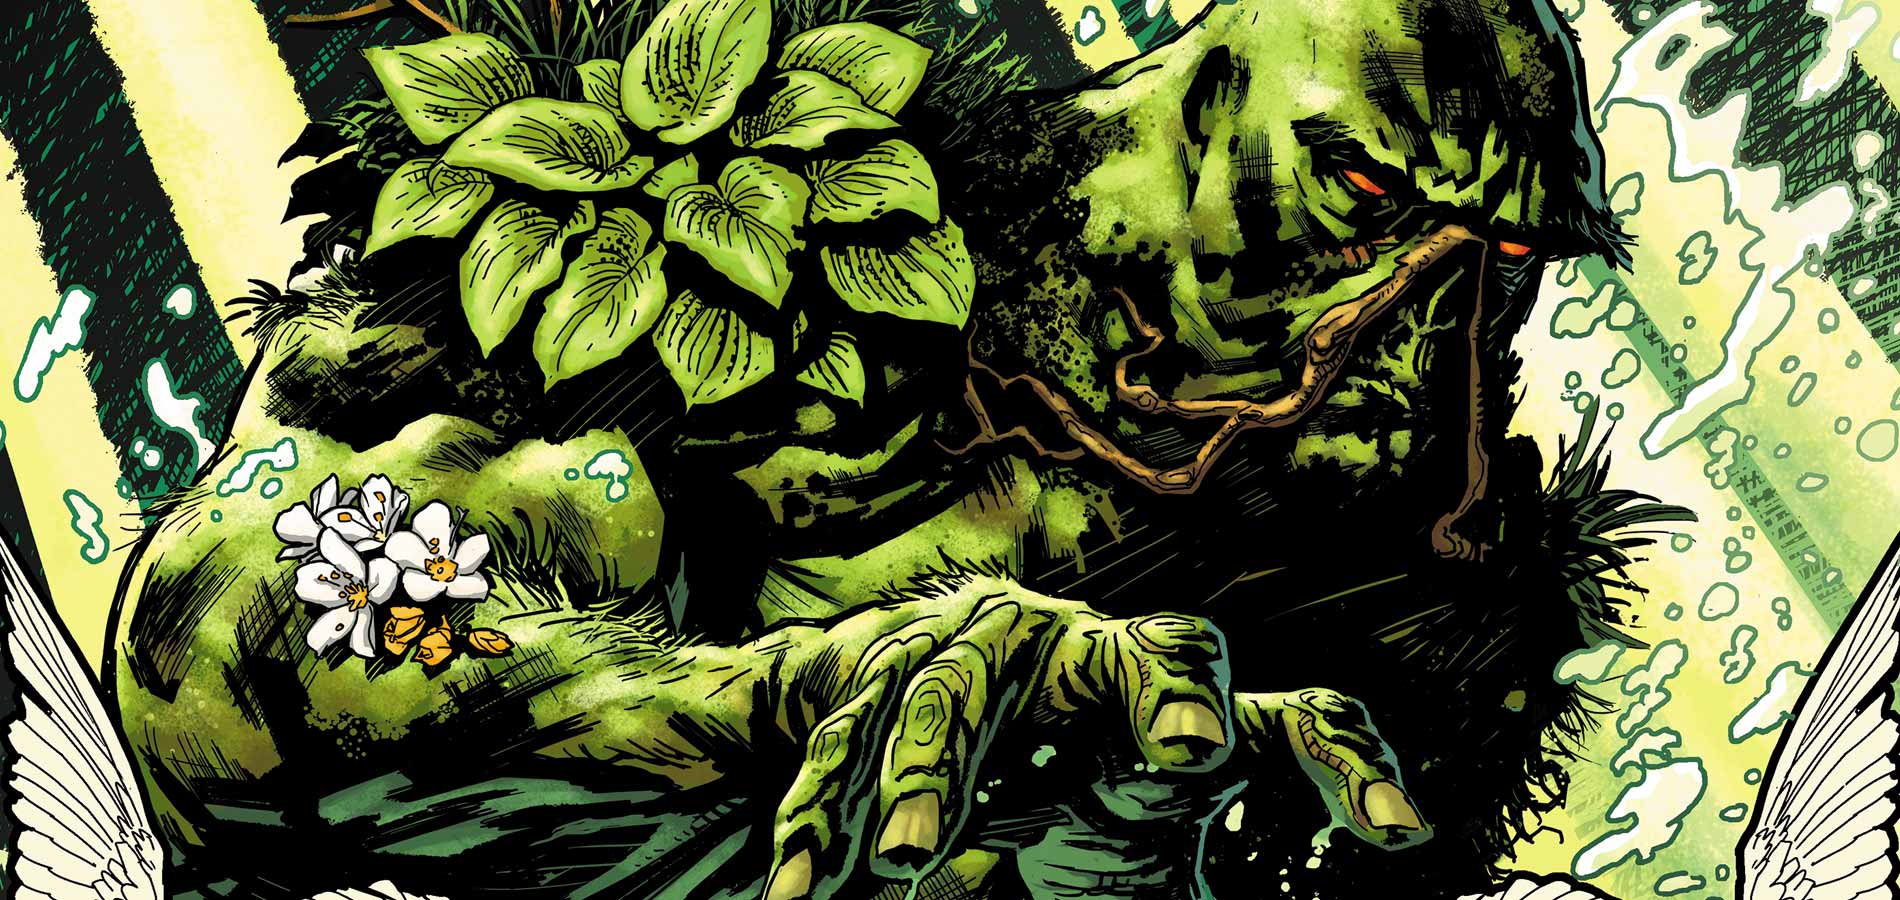 Swamp Thing Pics, Comics Collection